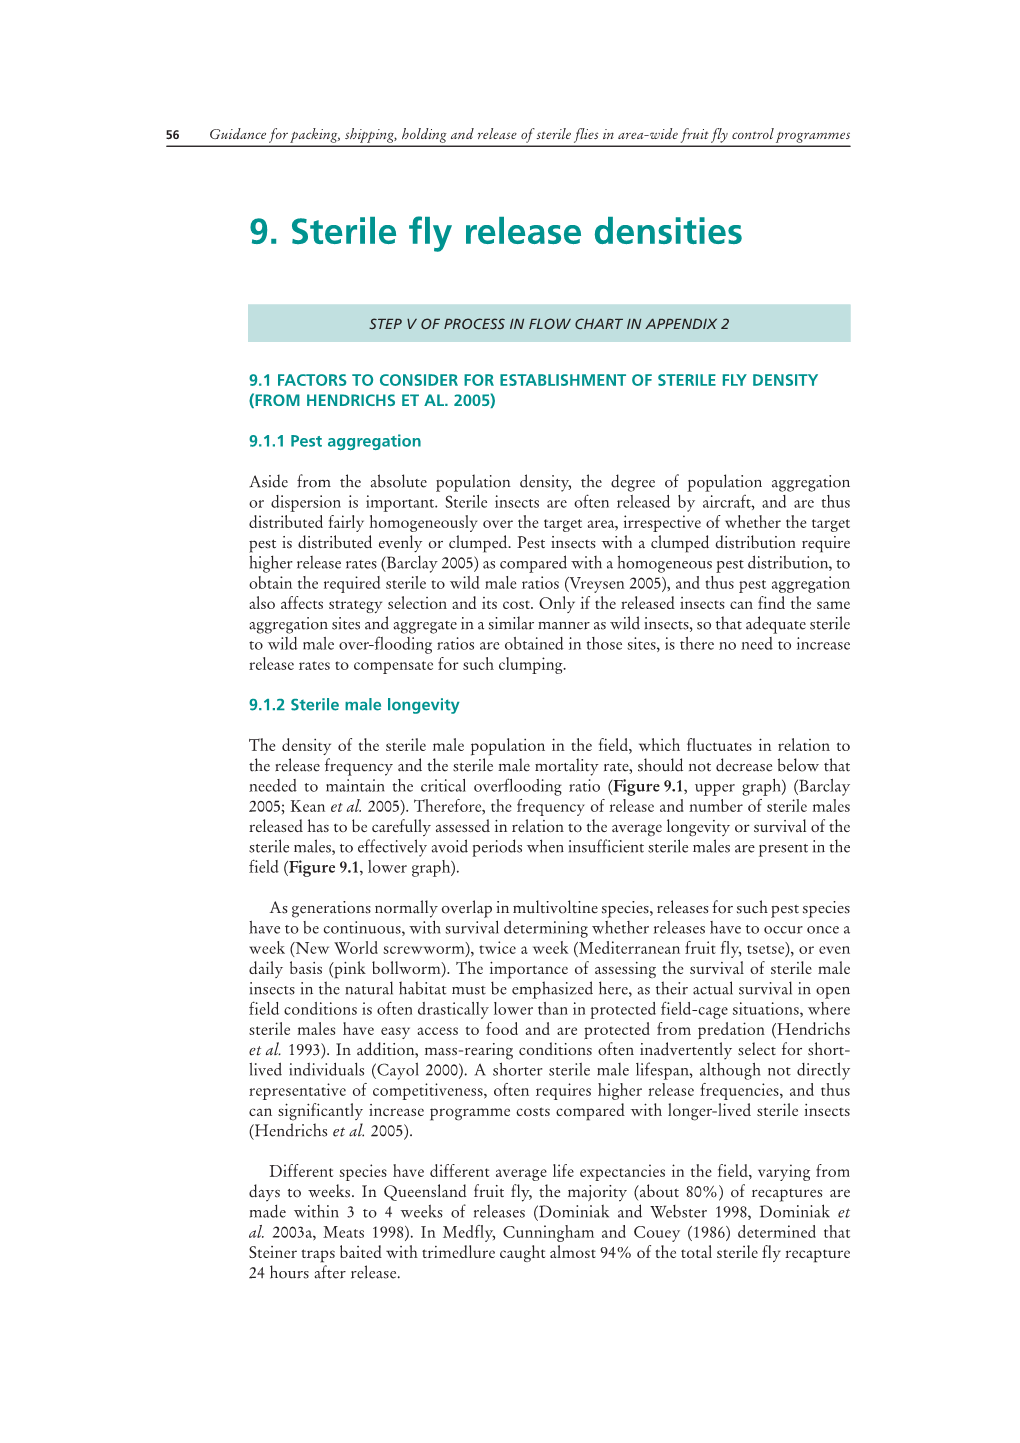 9. Sterile Fly Release Densities